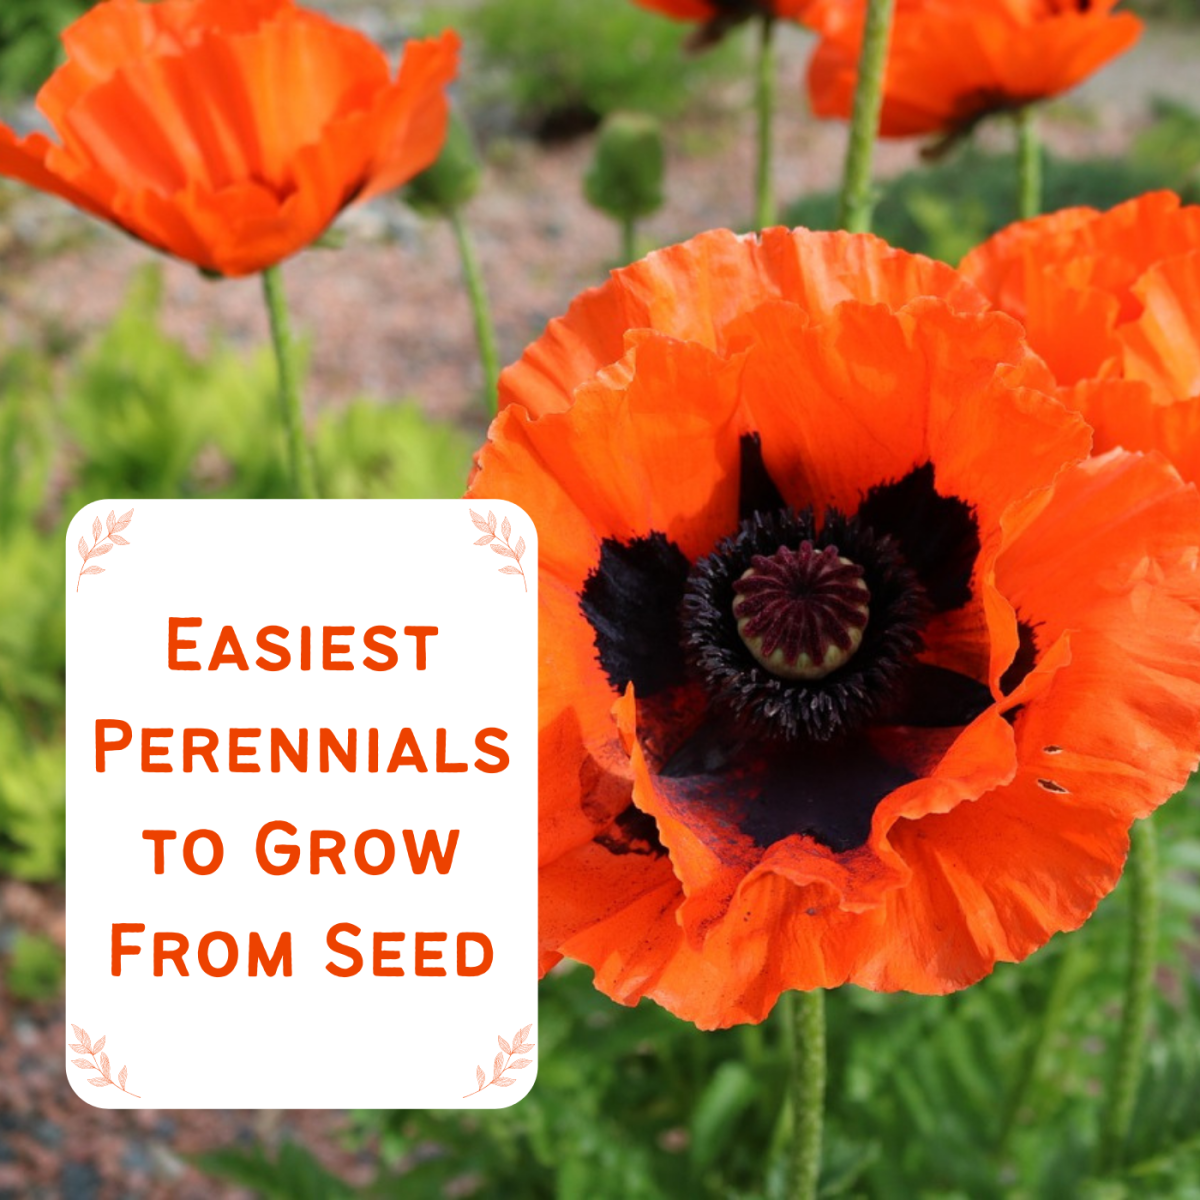 Oriental poppies are easy to grow from seed. Learn more about these and nine other perennials for your garden.